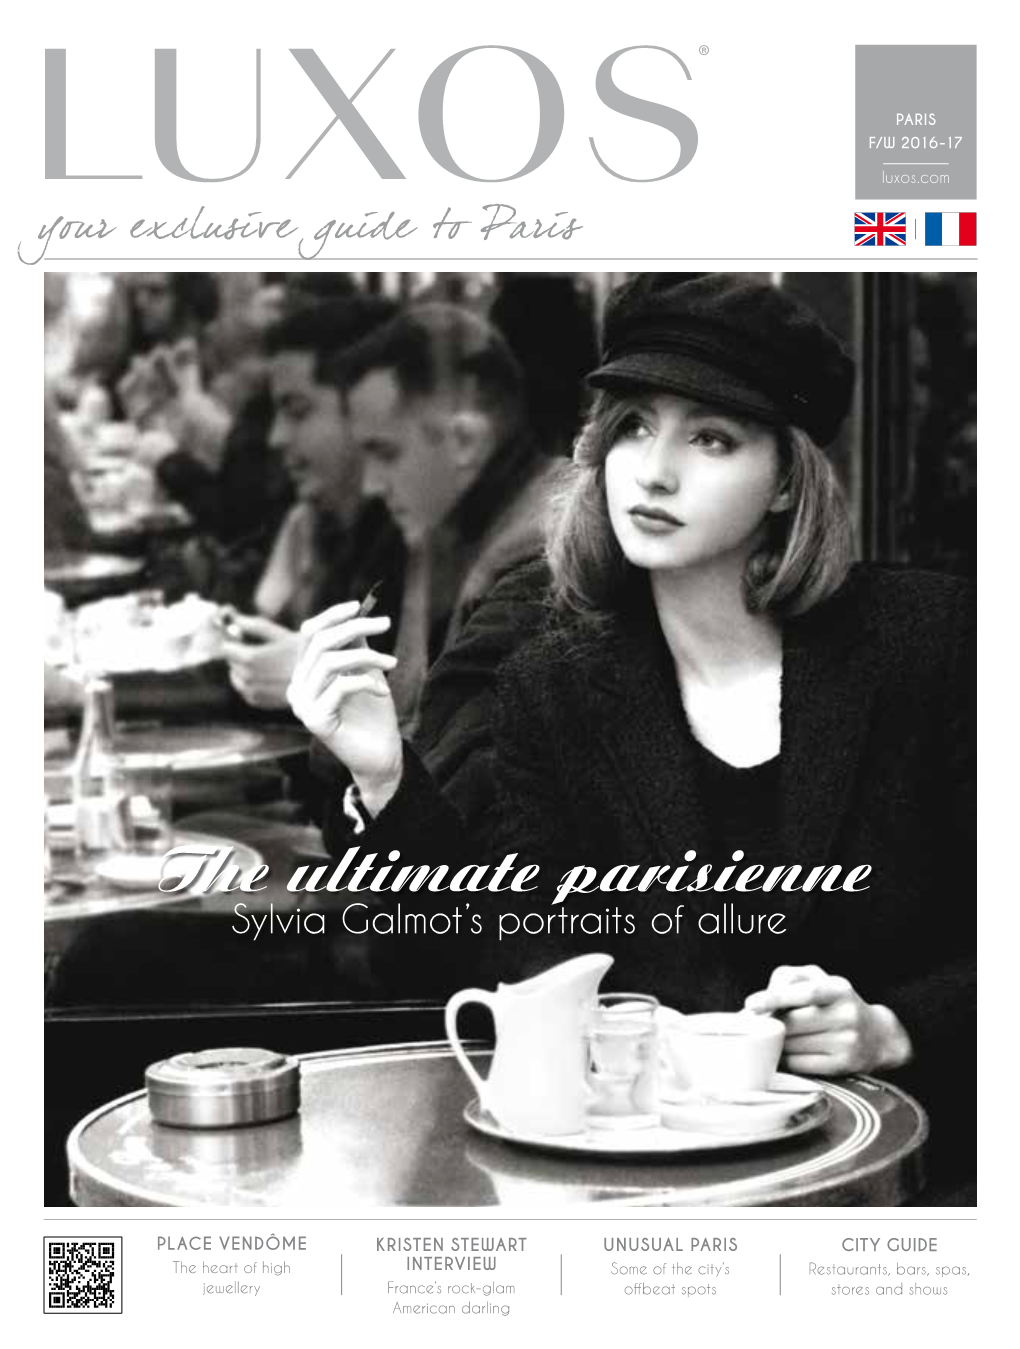 The Ultimate Parisienne Sylvia Galmot’S Portraits of Allure